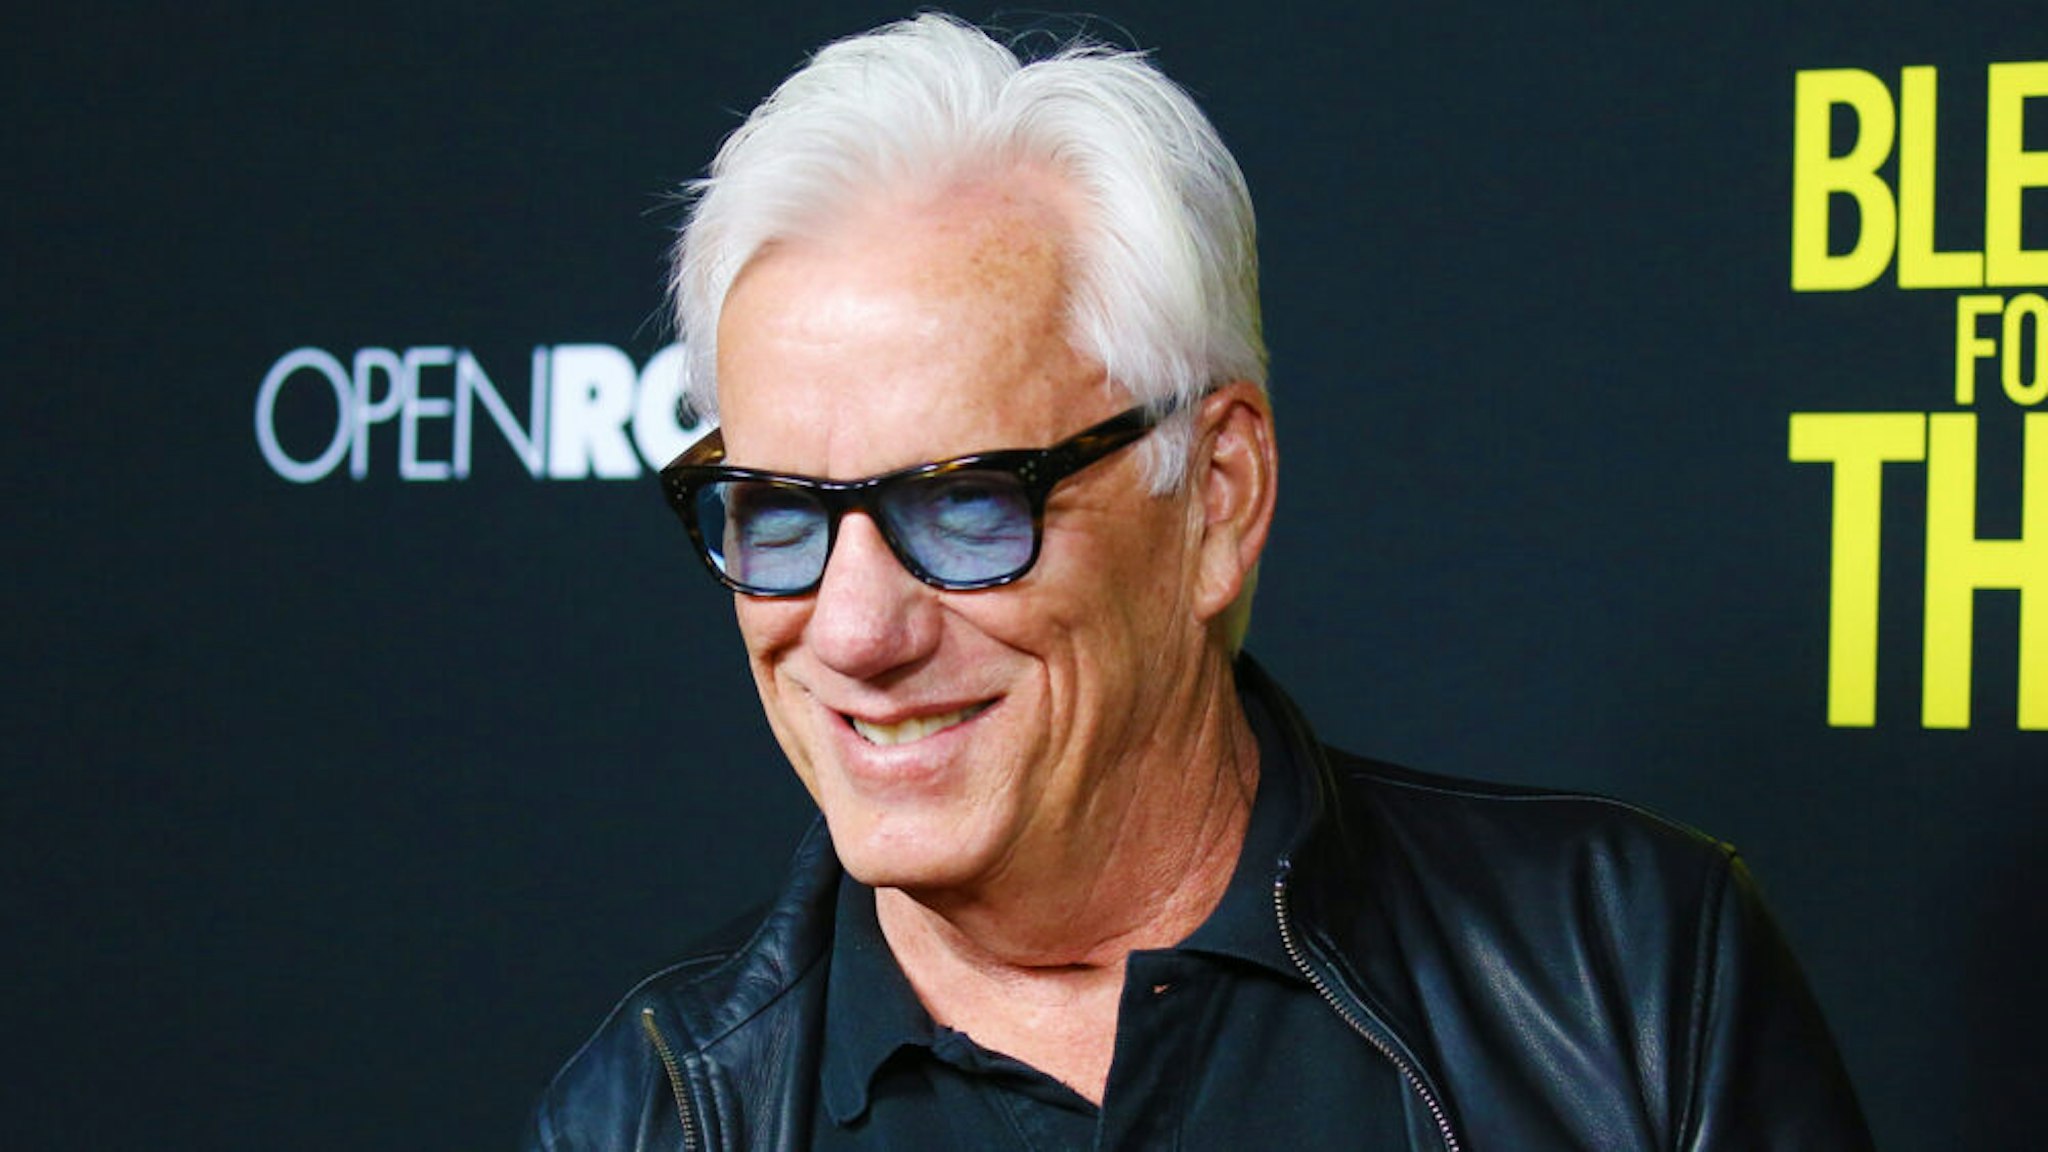 James Woods arrives at the Los Angeles premiere of Open Road Films' "Bleed For This" held at Samuel Goldwyn Theater on November 2, 2016 in Beverly Hills, California.